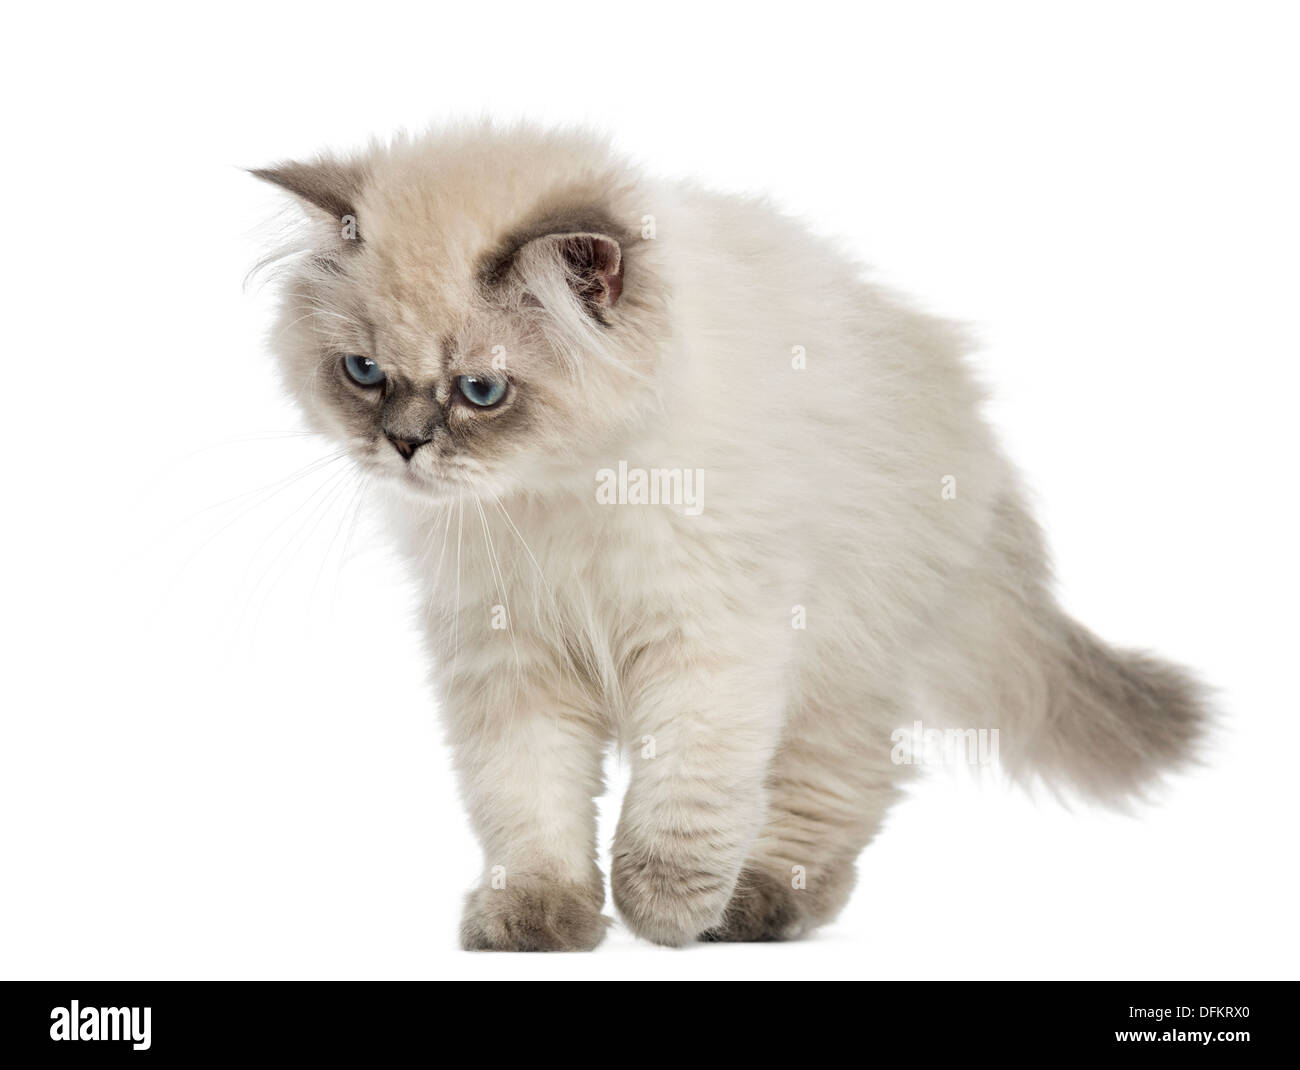 British Longhair kitten walking, looking down, 5 months old, against white background Stock Photo